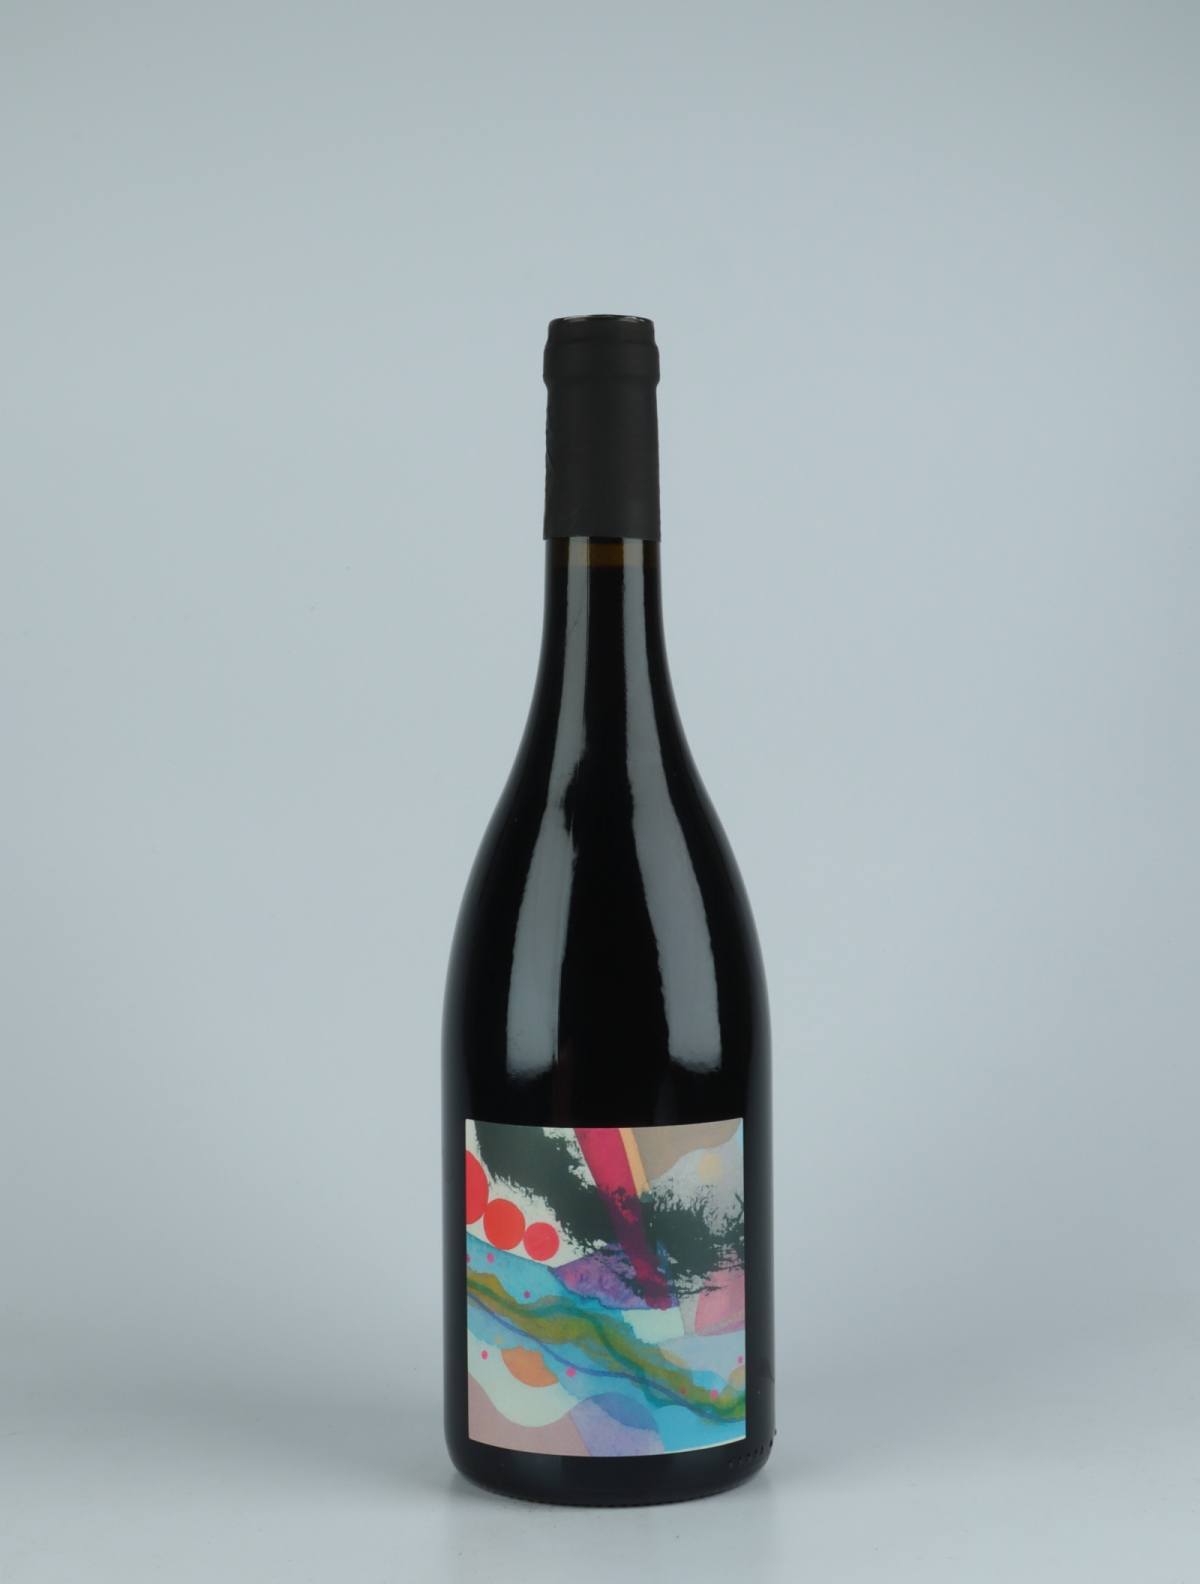 A bottle 2020 Touski Red wine from Patrick Bouju, Auvergne in France